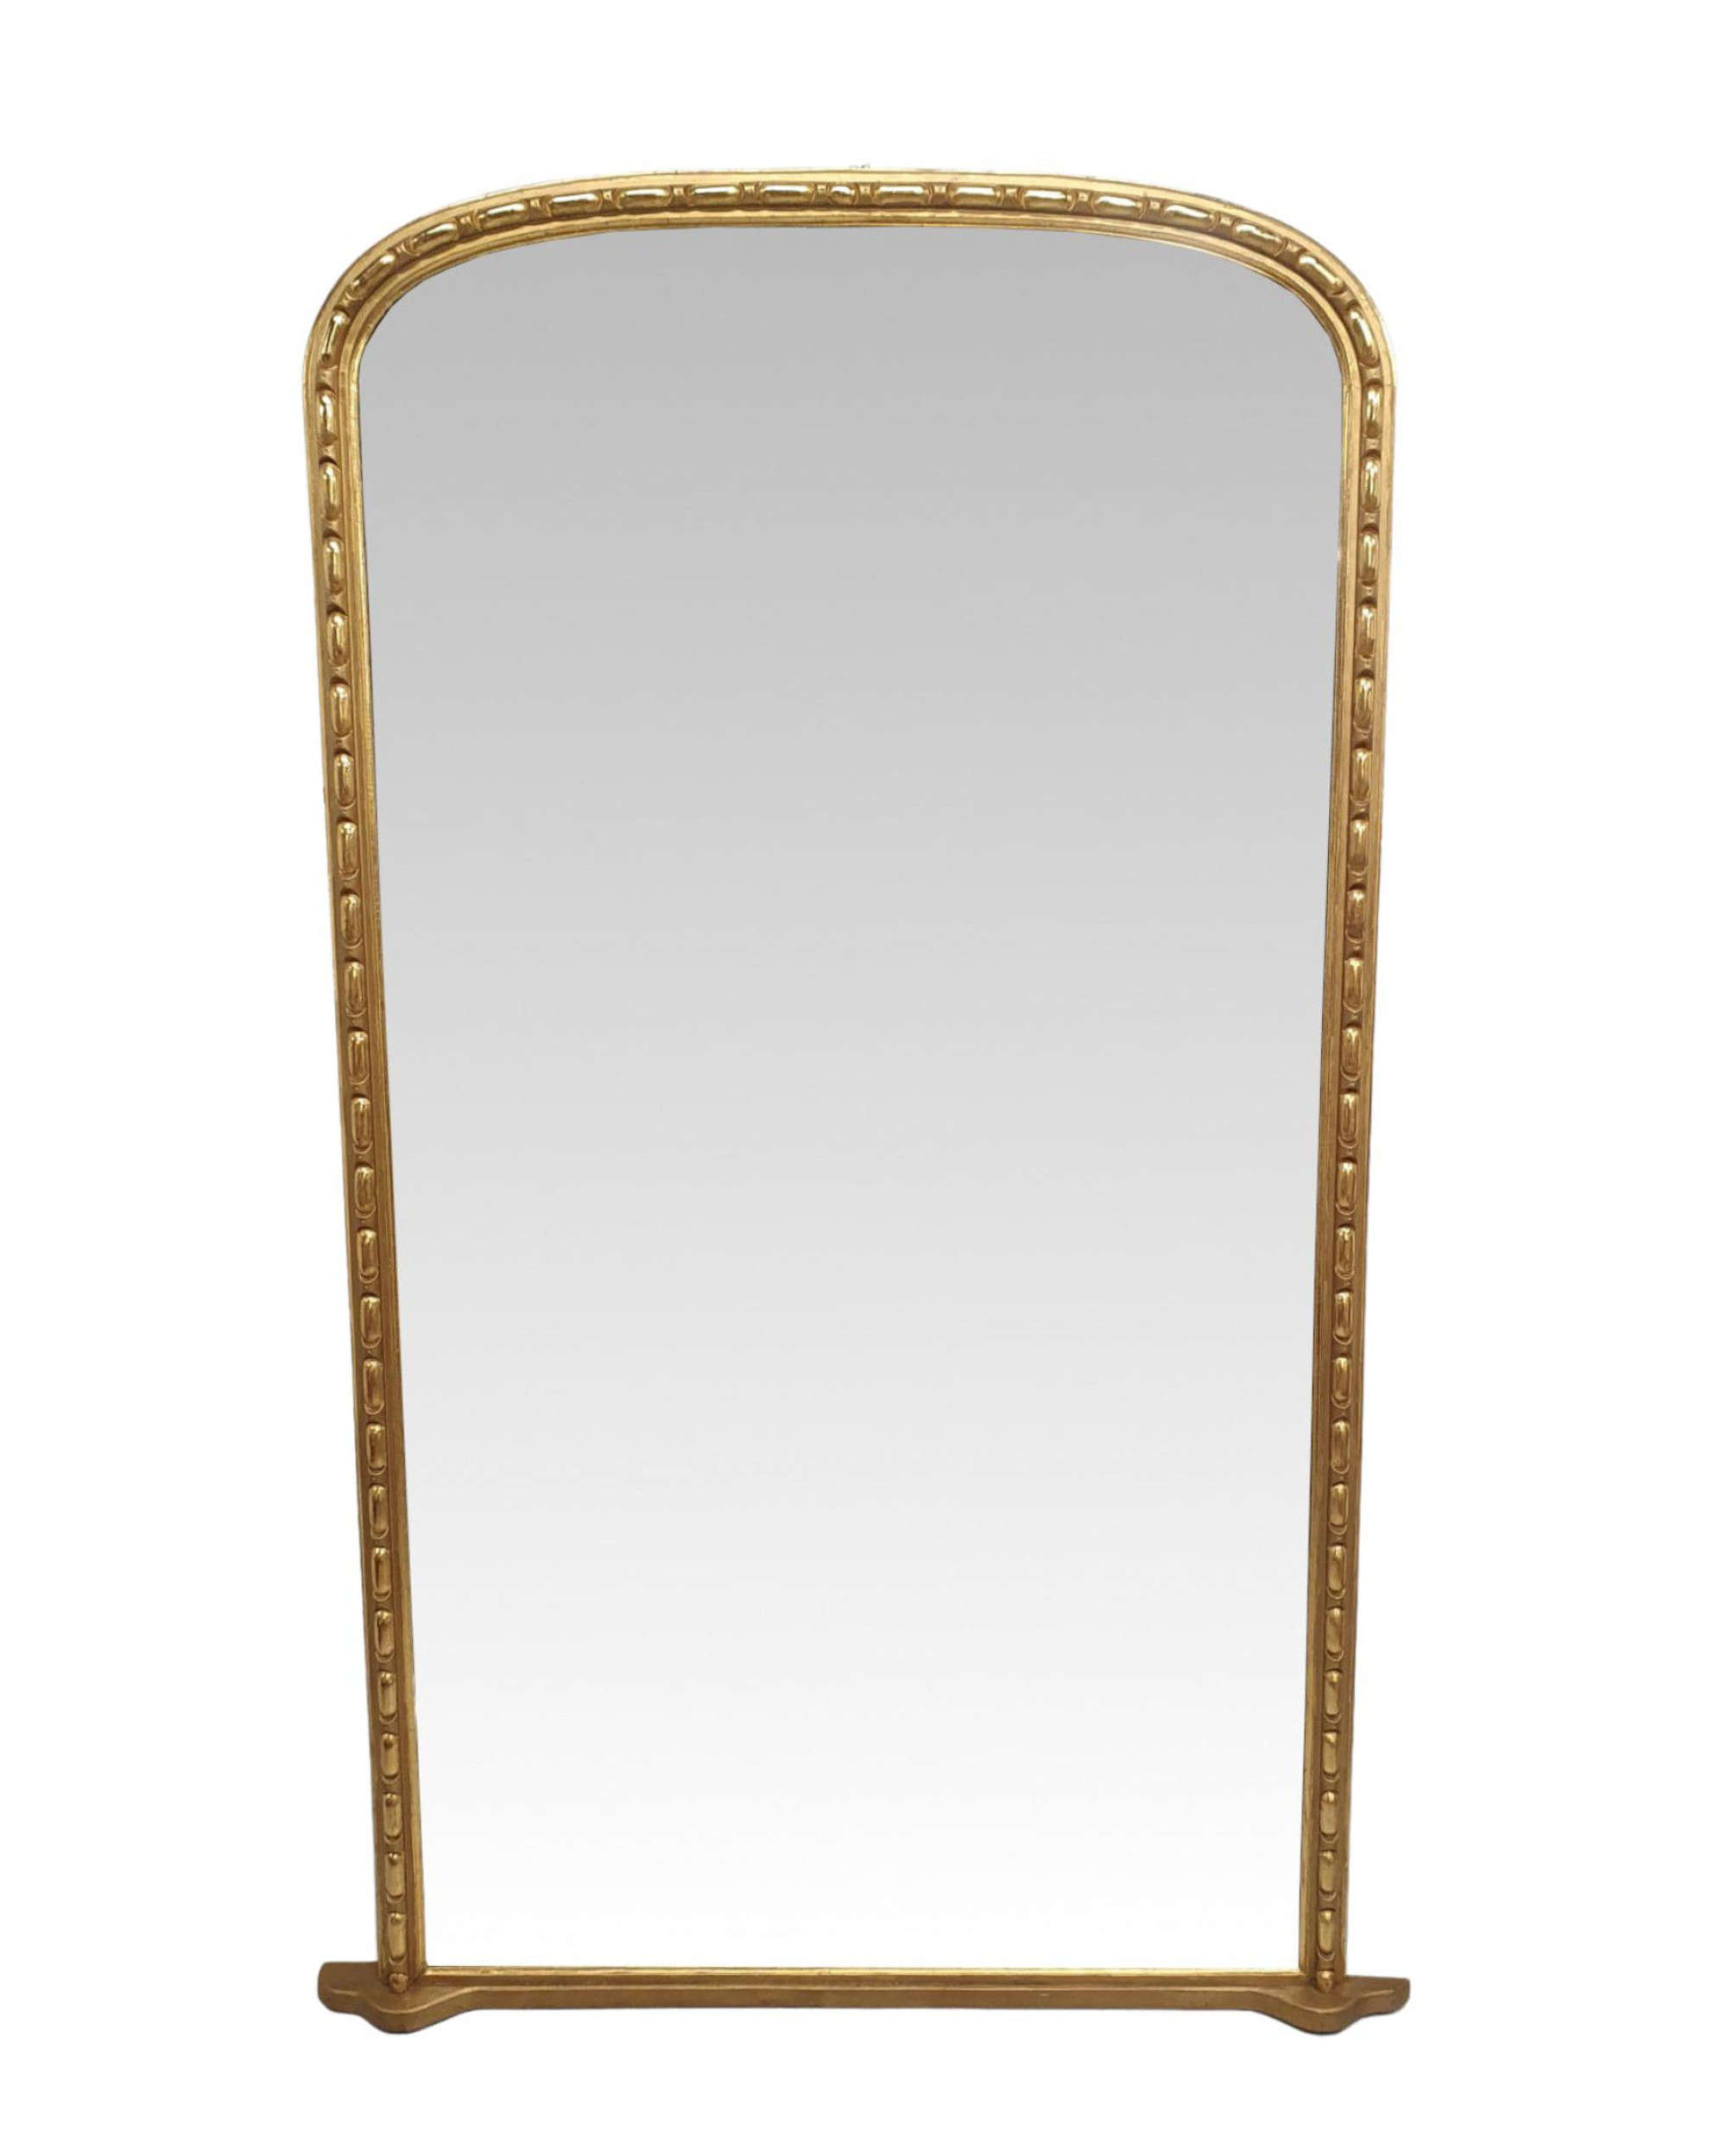 An Exceptional and Rare 19th Century Giltwood Hall or Leaner or Full Length Mirror